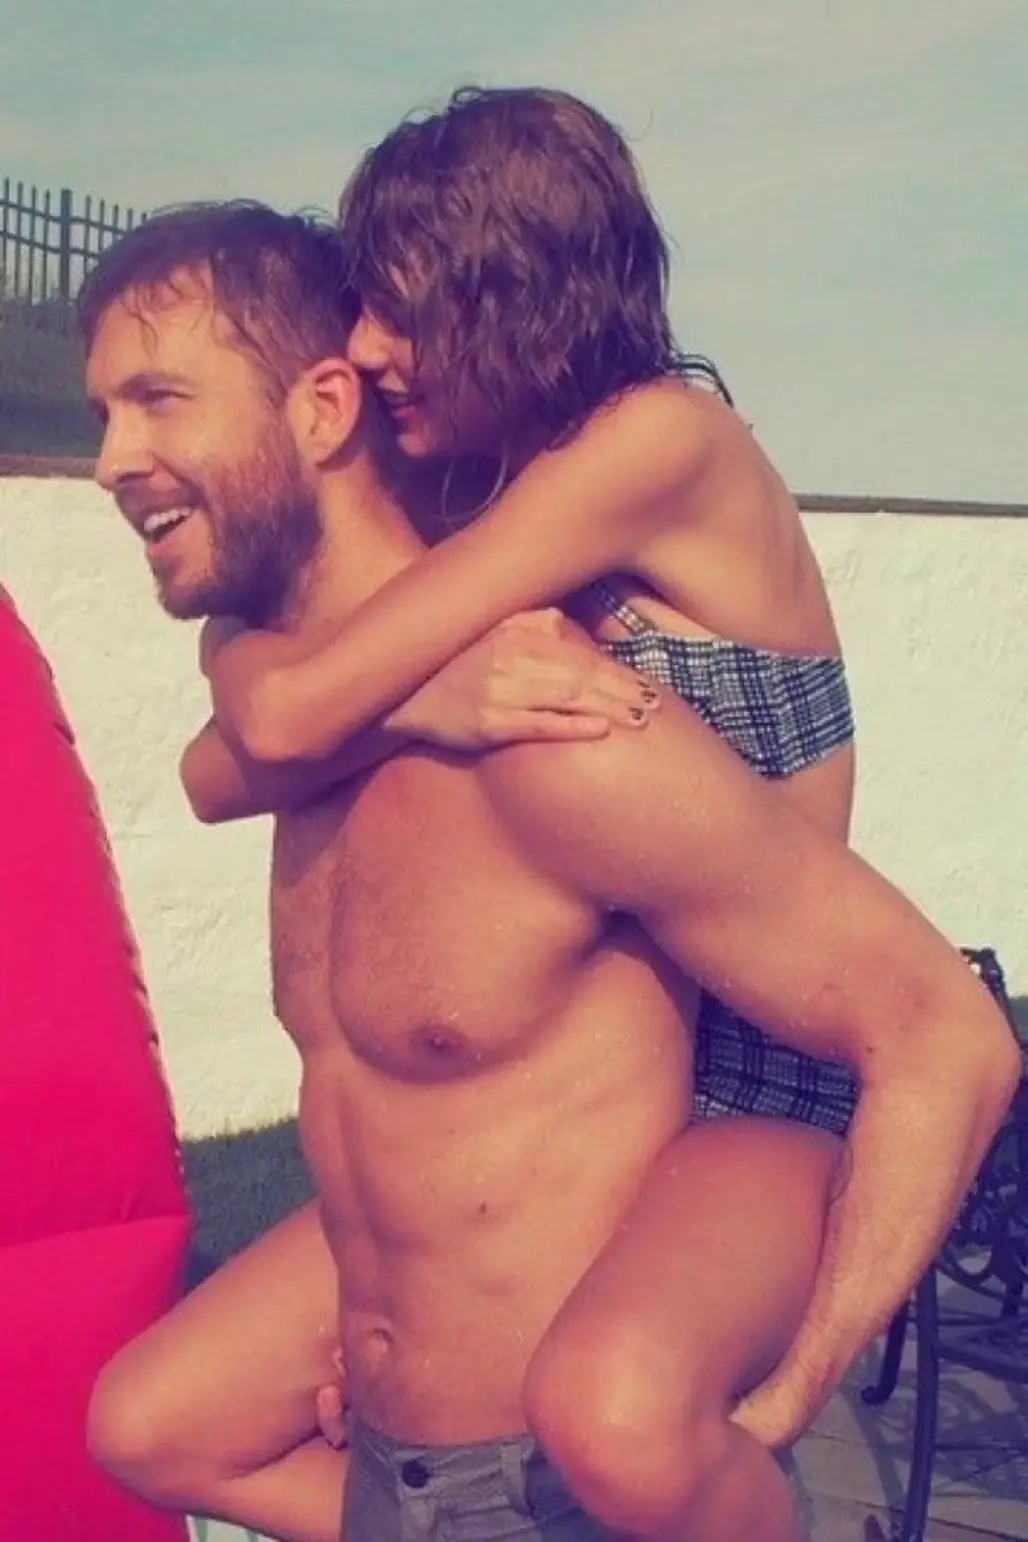 Taylor Swift and Calvin Harris' July 4th Weekend